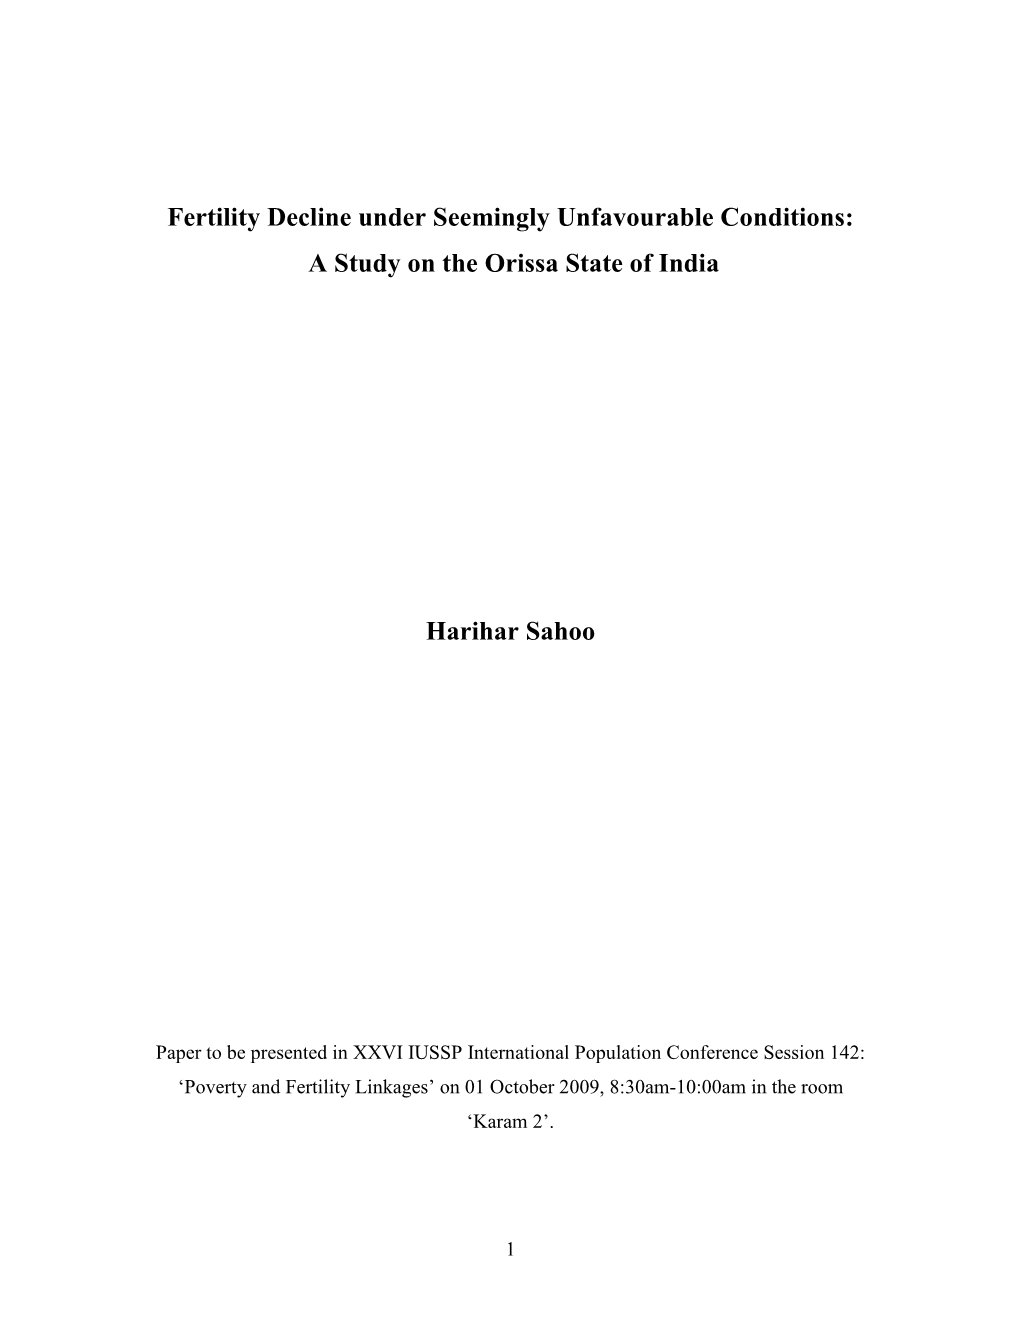 Fertility Decline Under Seemingly Unfavourable Conditions: a Study on the Orissa State of India